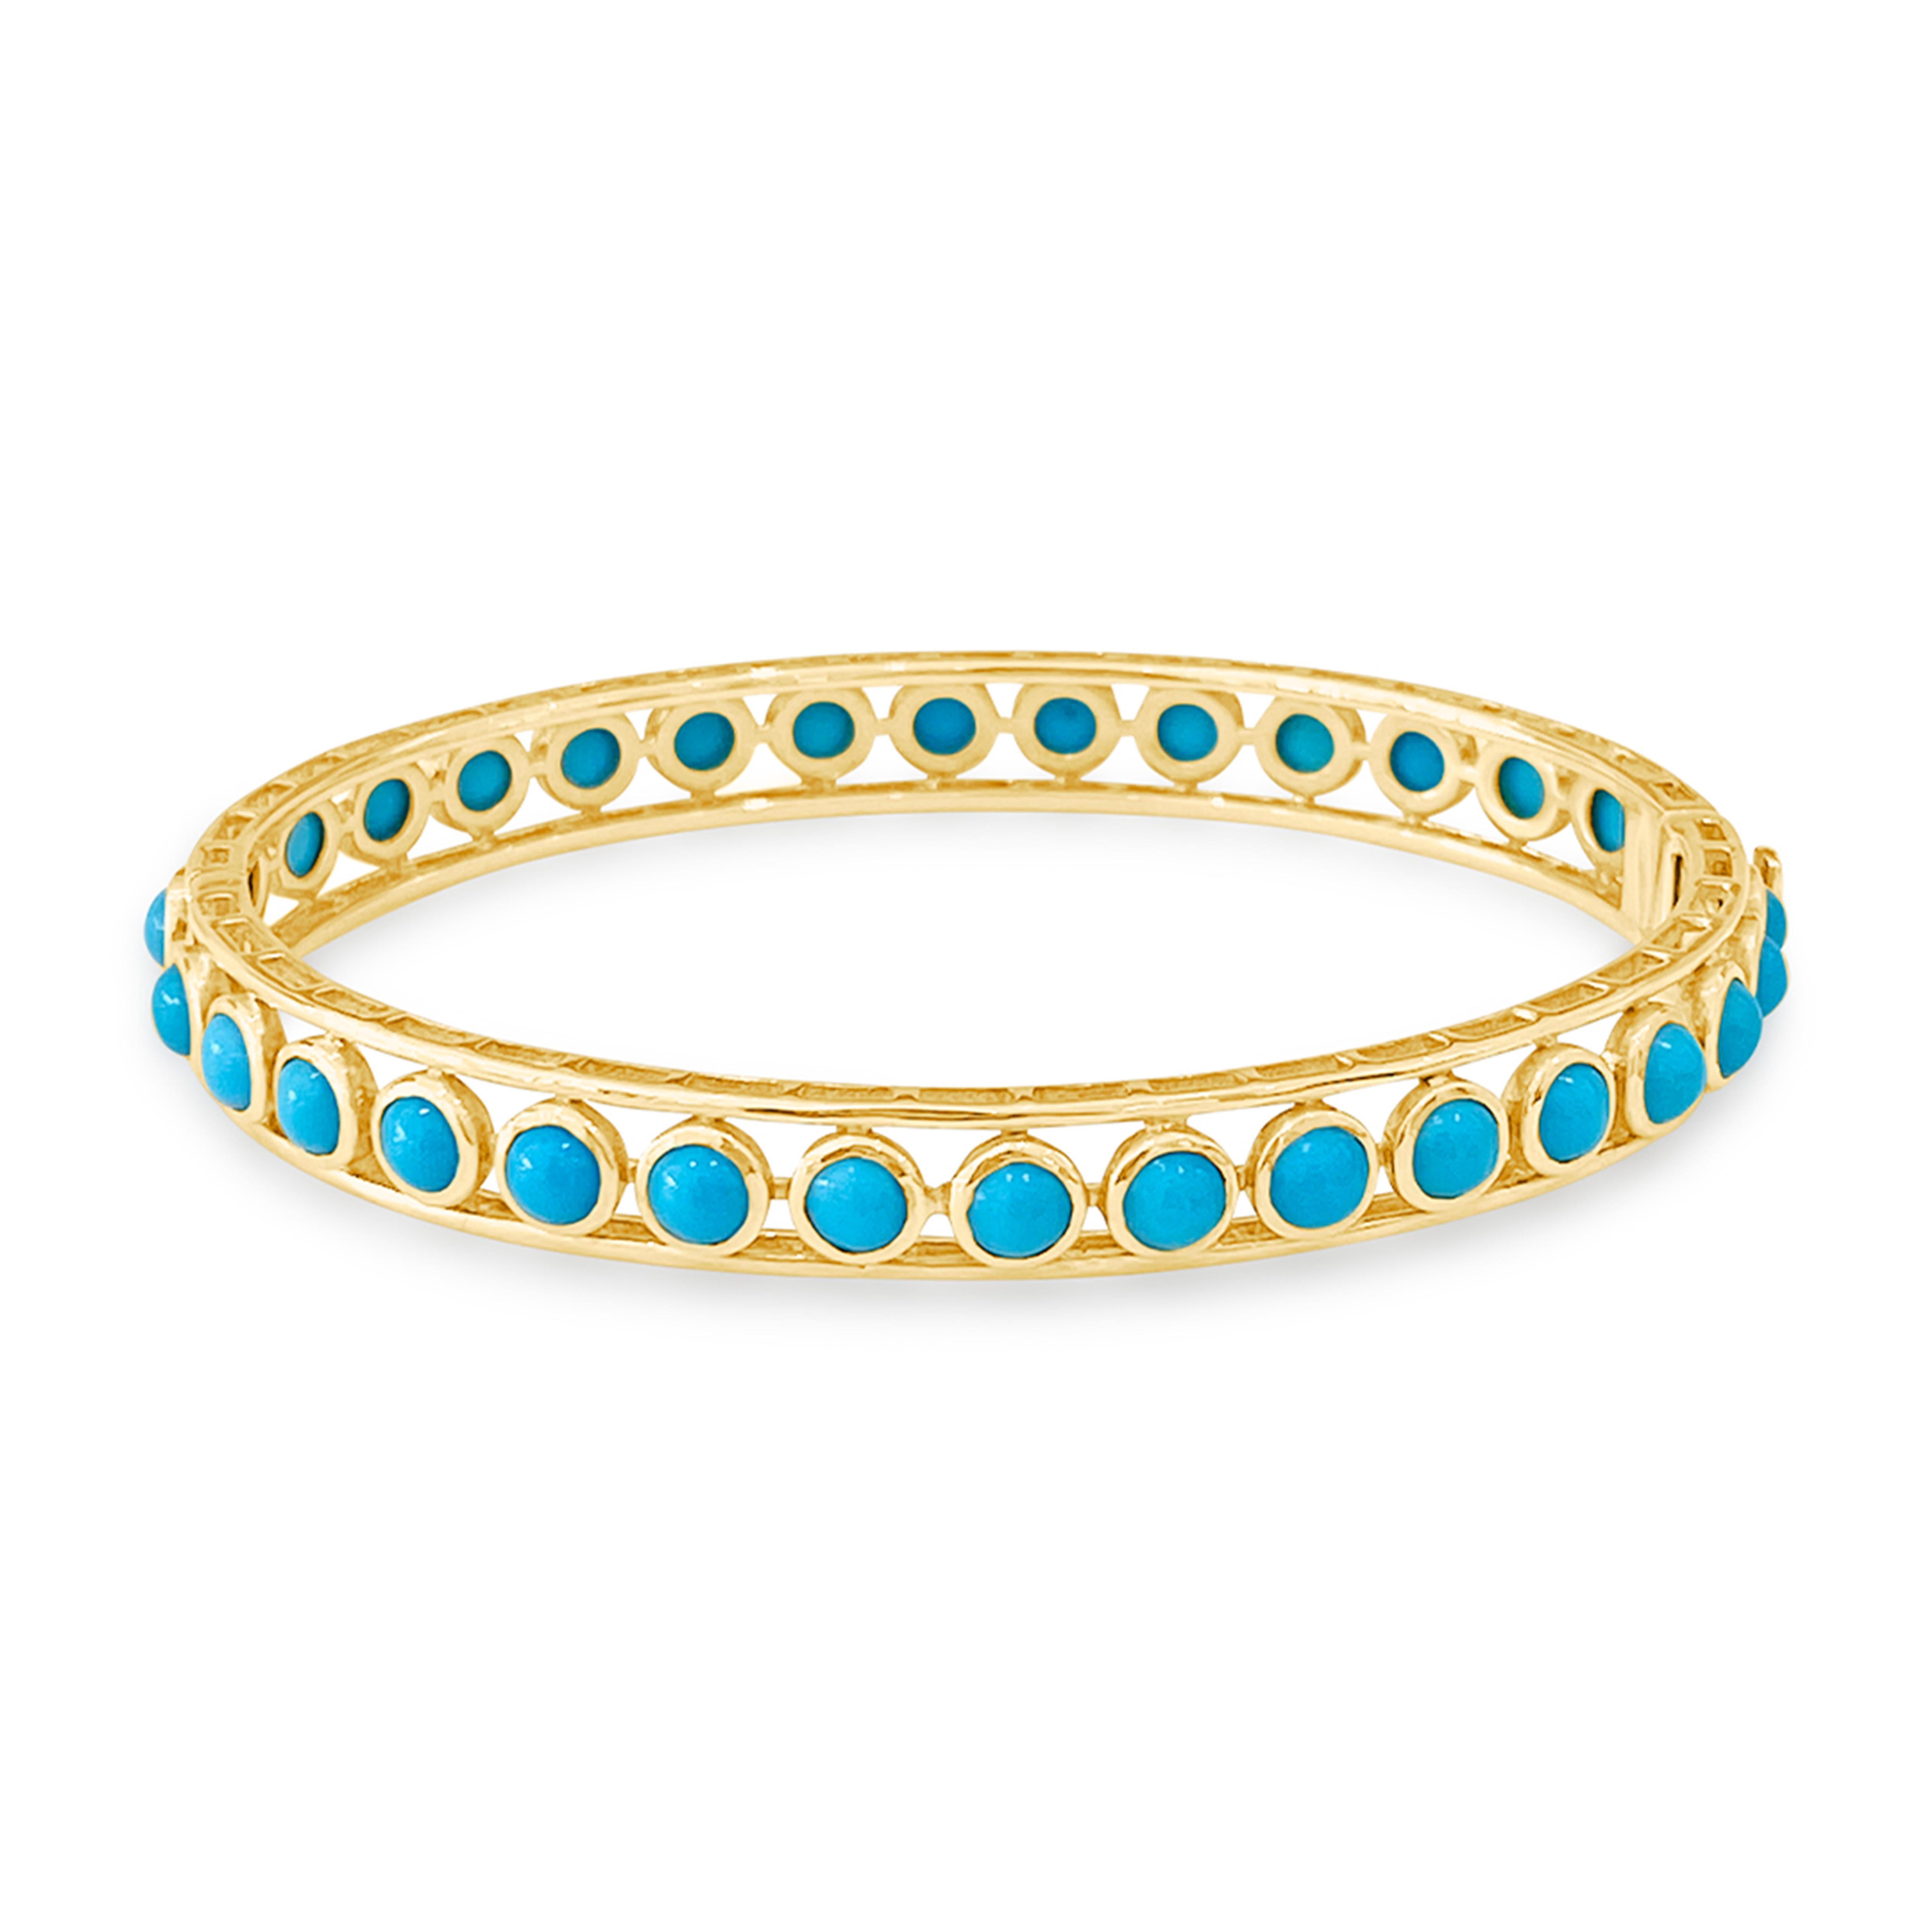 Tresor Turquoise Bangle features 6.50 cts Turquoise in 18k yellow gold. The Bracelet are an ode to the luxurious yet classic beauty with sparkly diamonds. Their contemporary and modern design makes them versatile in their use. The Bracelet are